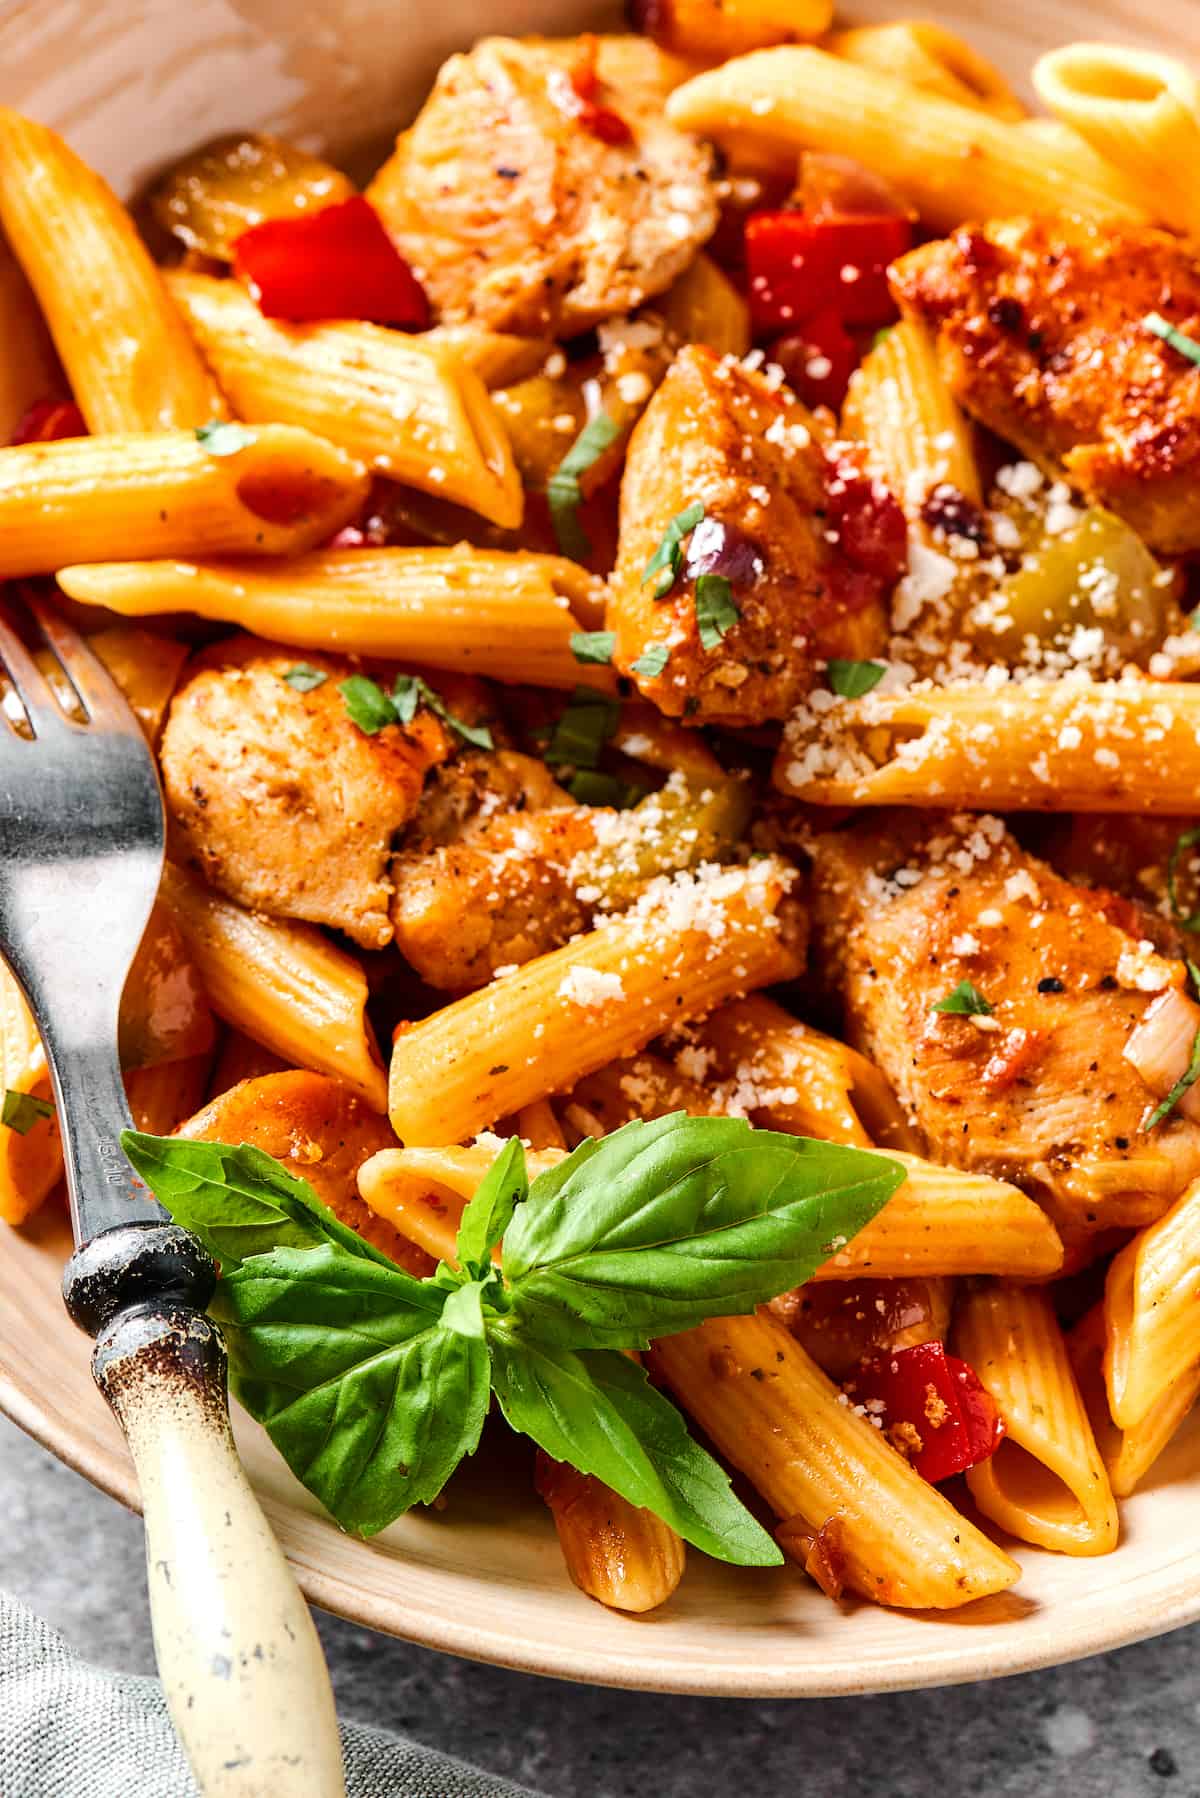 Chicken and penne with tomatoes, peppers, and onions.